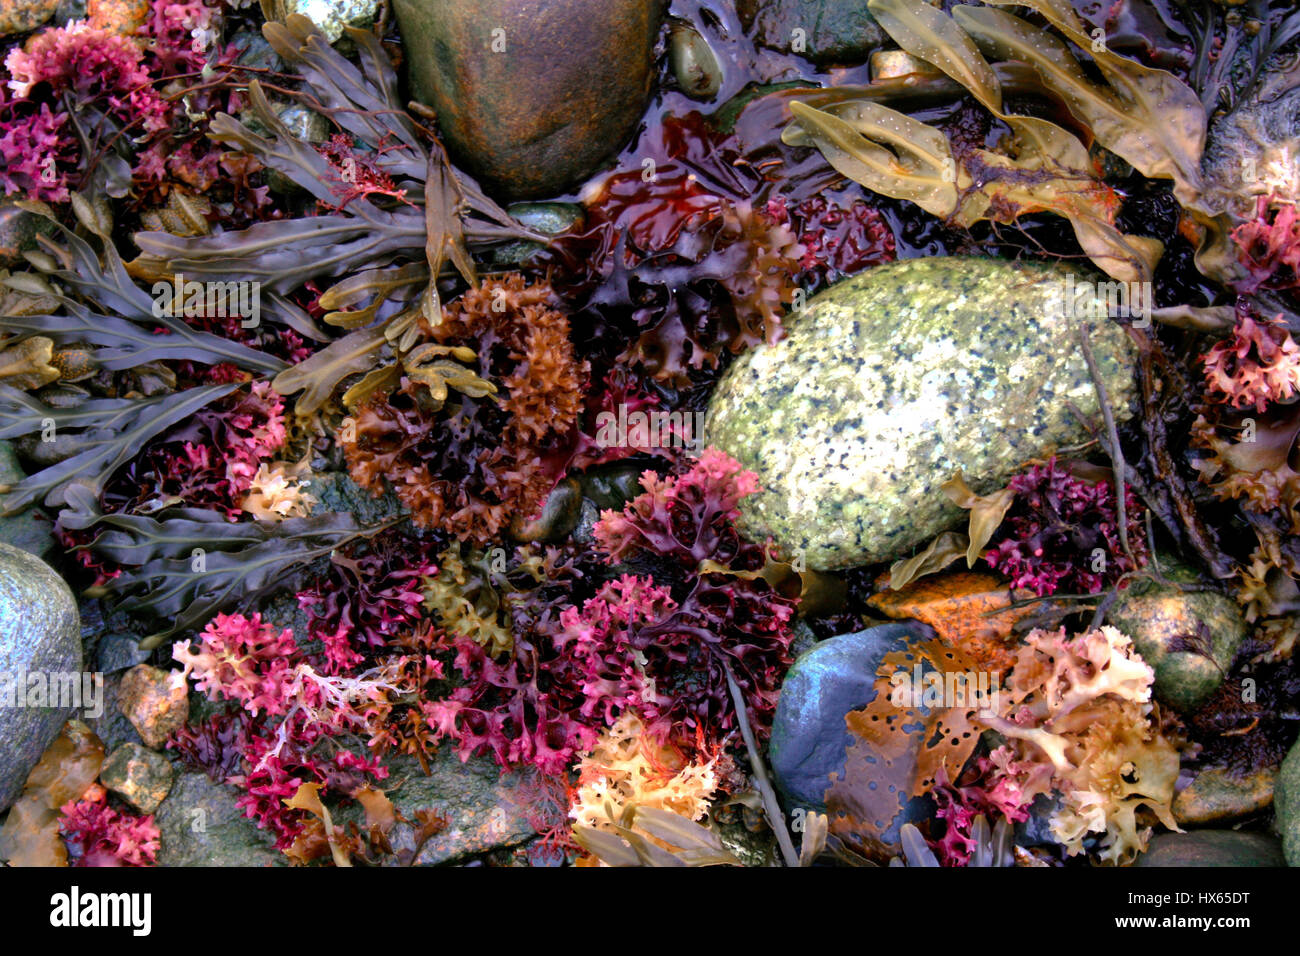 A pile of pinkish colorful seaweed on the shore in Acadia National Park near Bar Harbor, Maine. Stock Photo